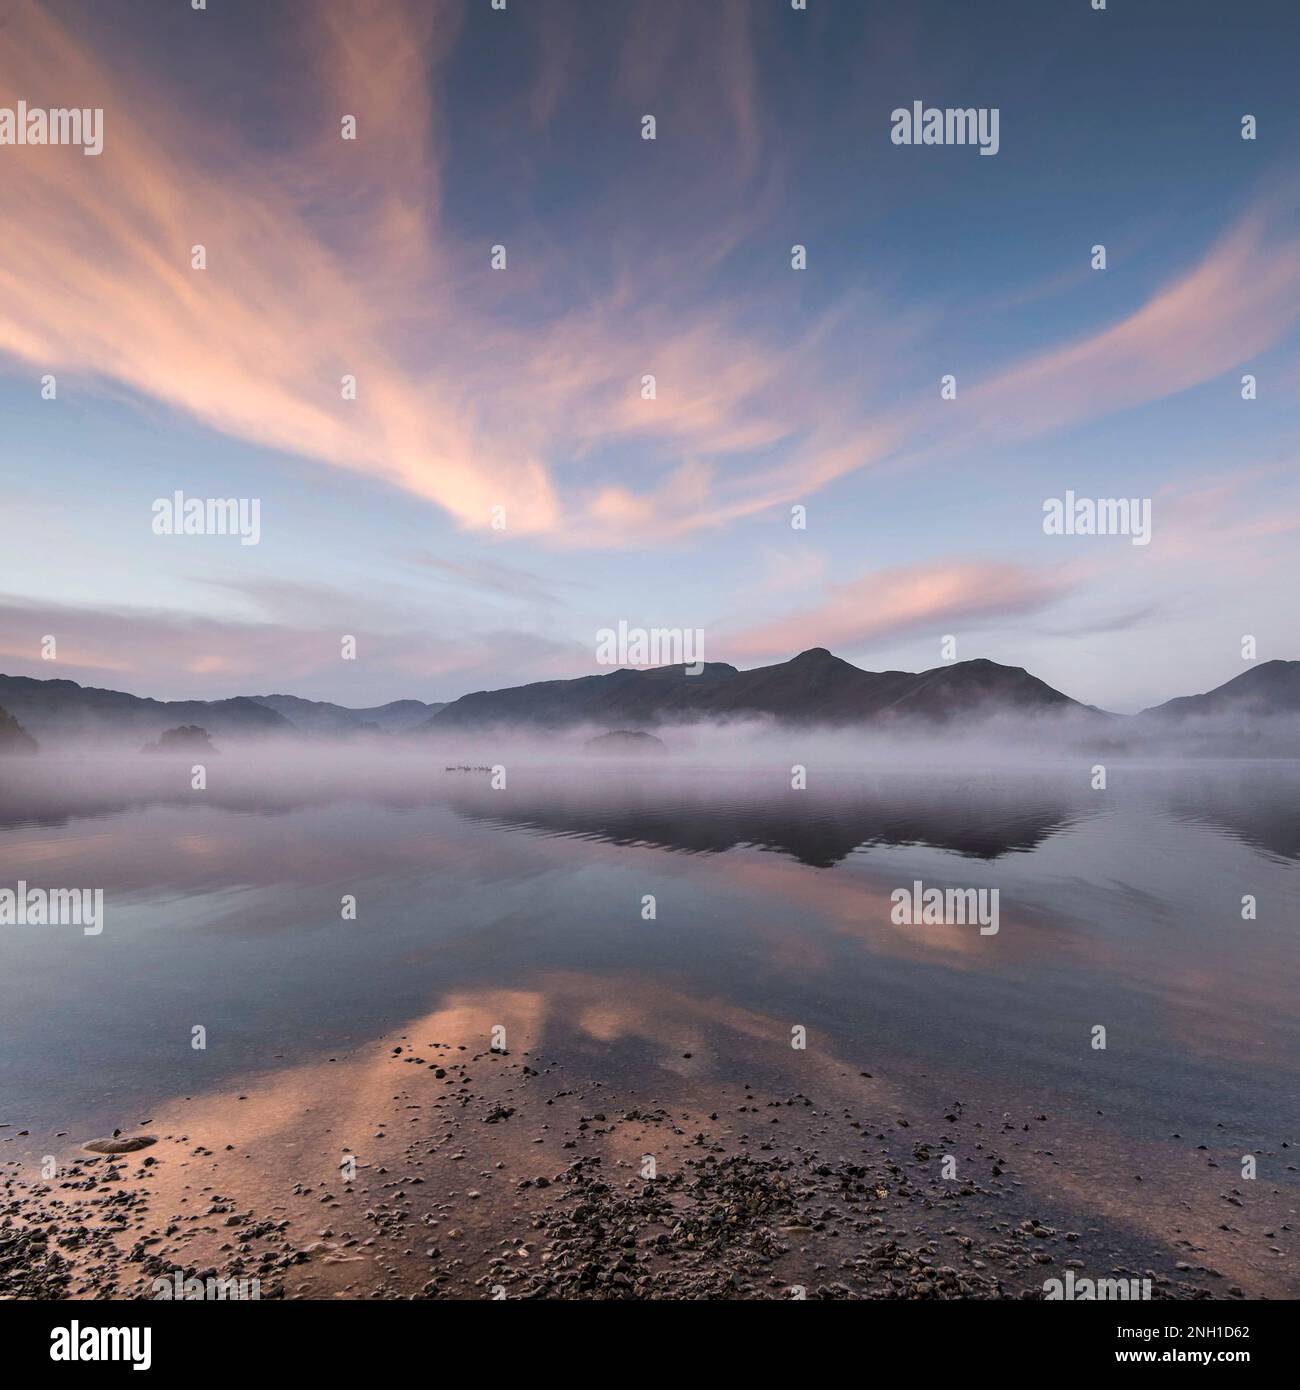 Square image of spring dawn sky reflected in Derwentwater near Stock Photo